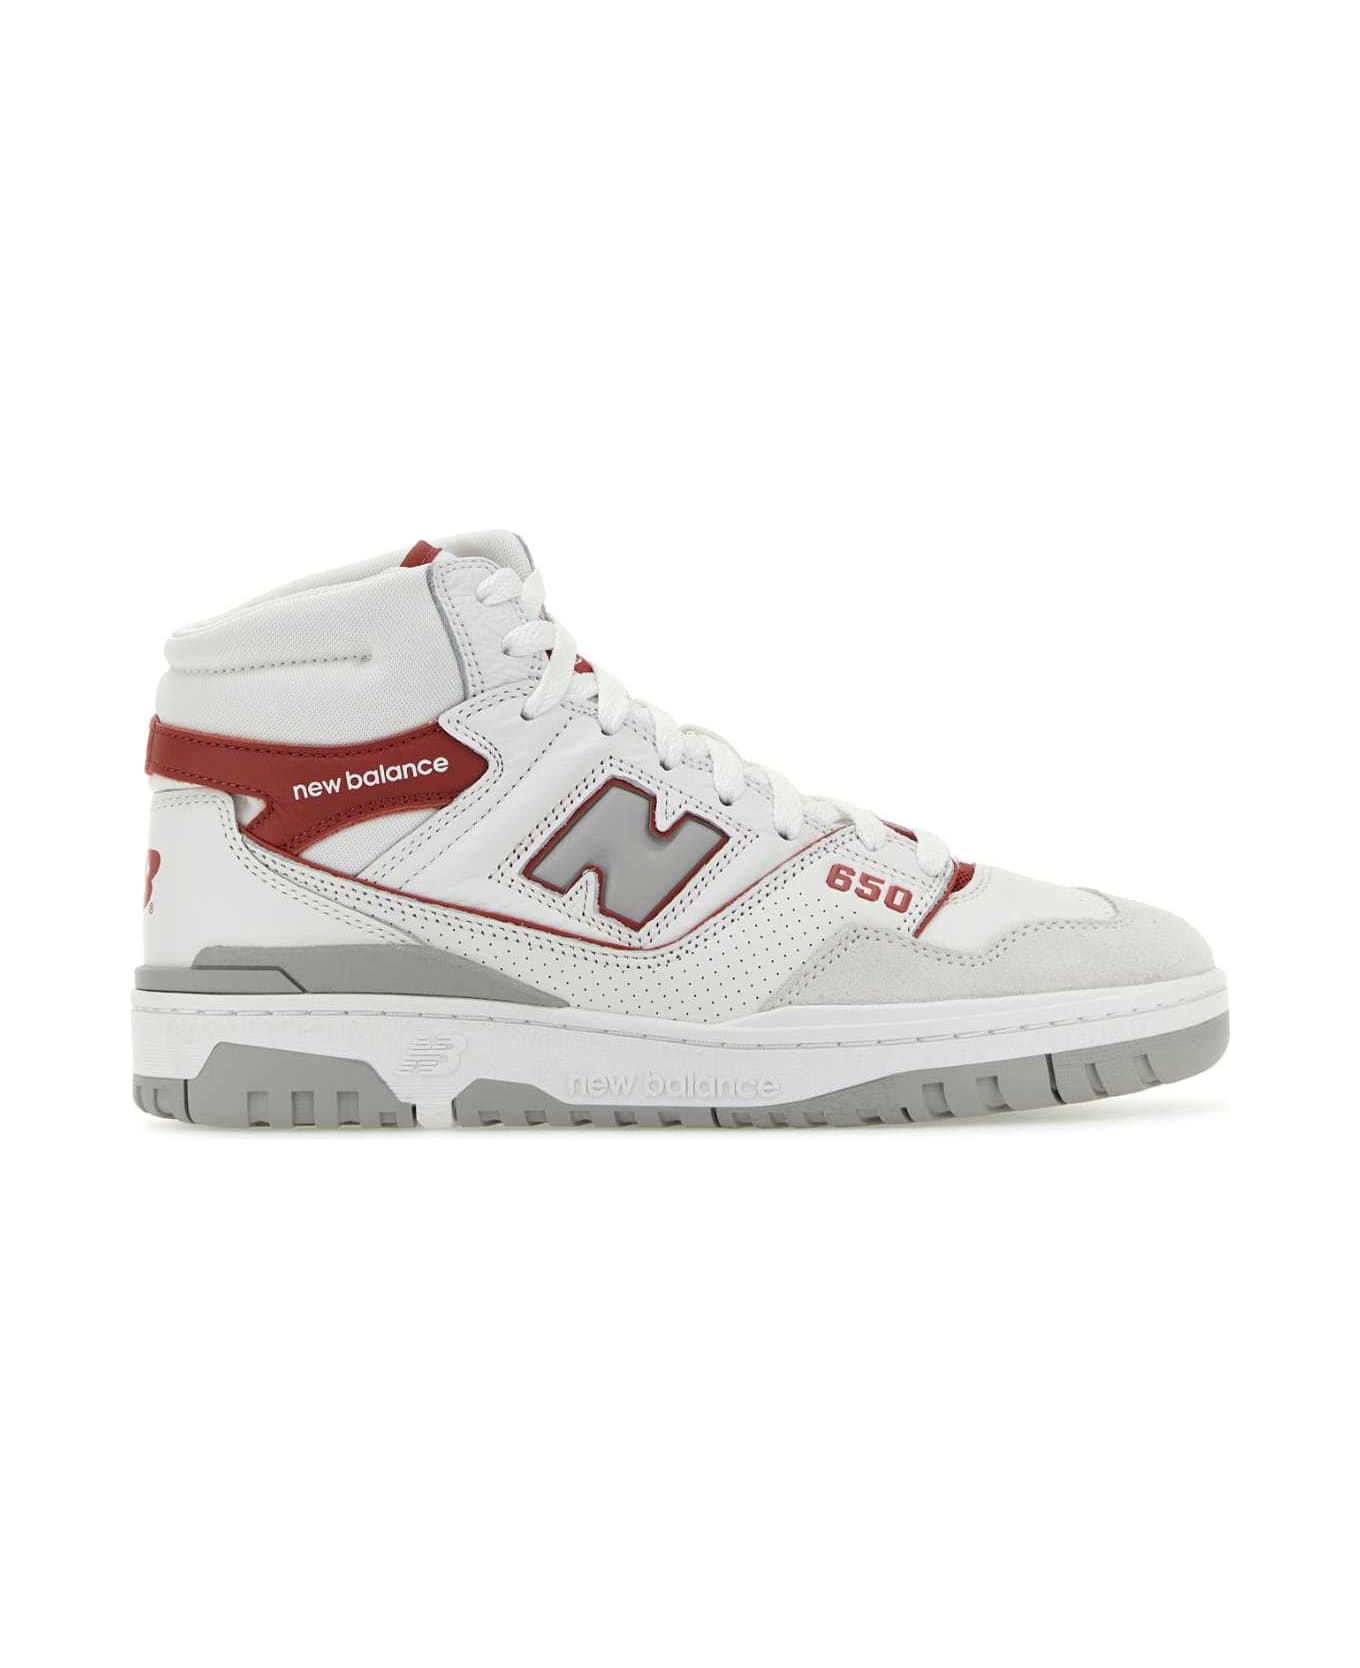 New Balance Multicolor Leather And Suede 650 Sneakers - WHITE